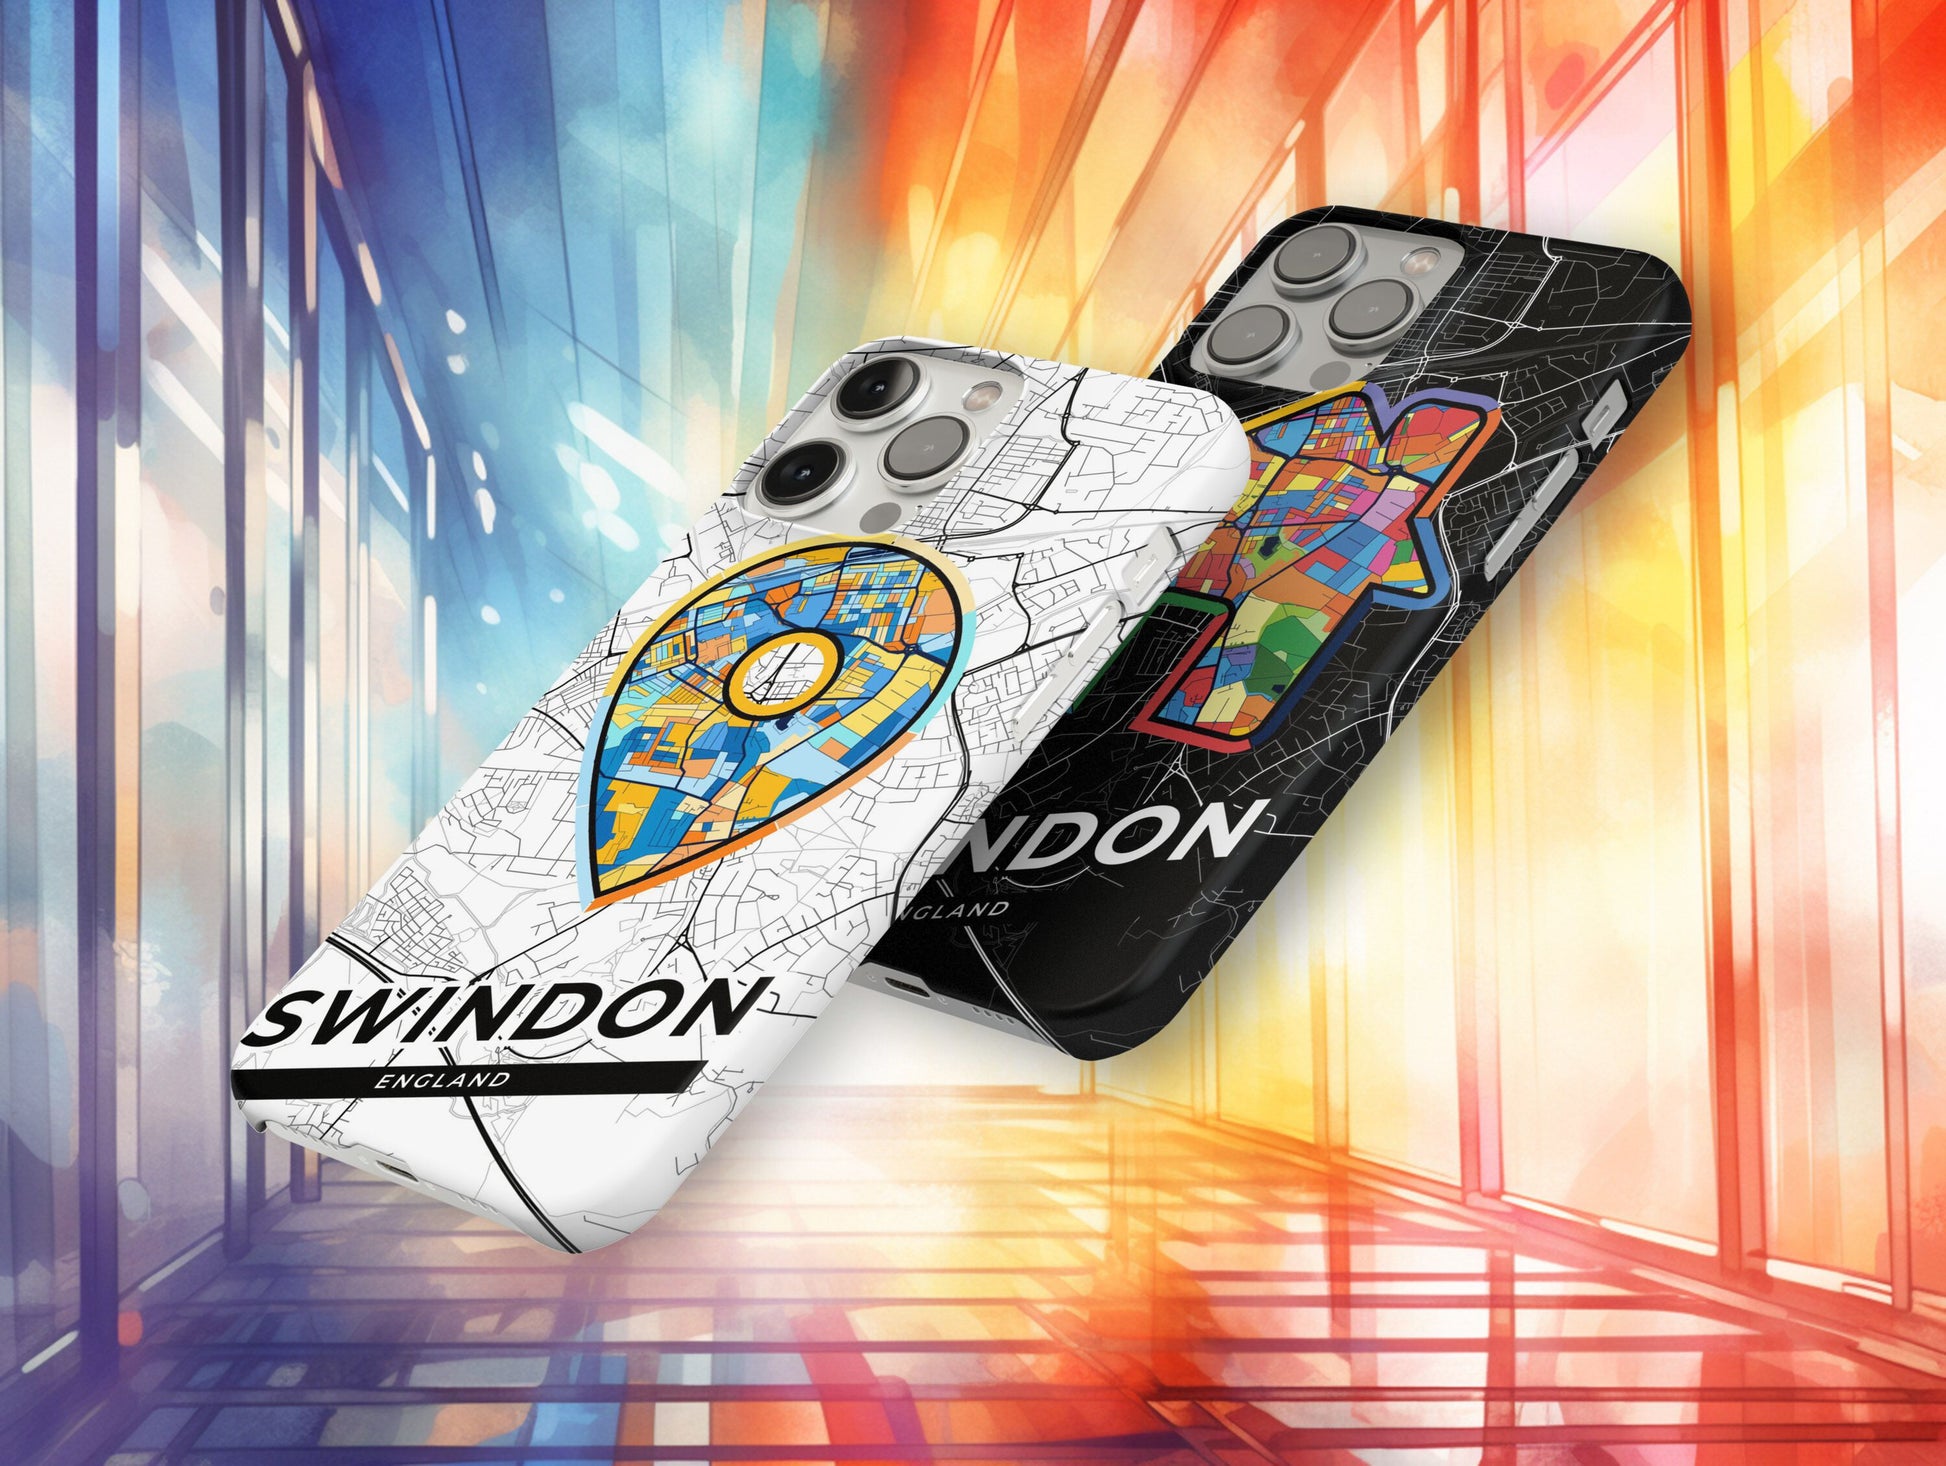 Swindon England slim phone case with colorful icon